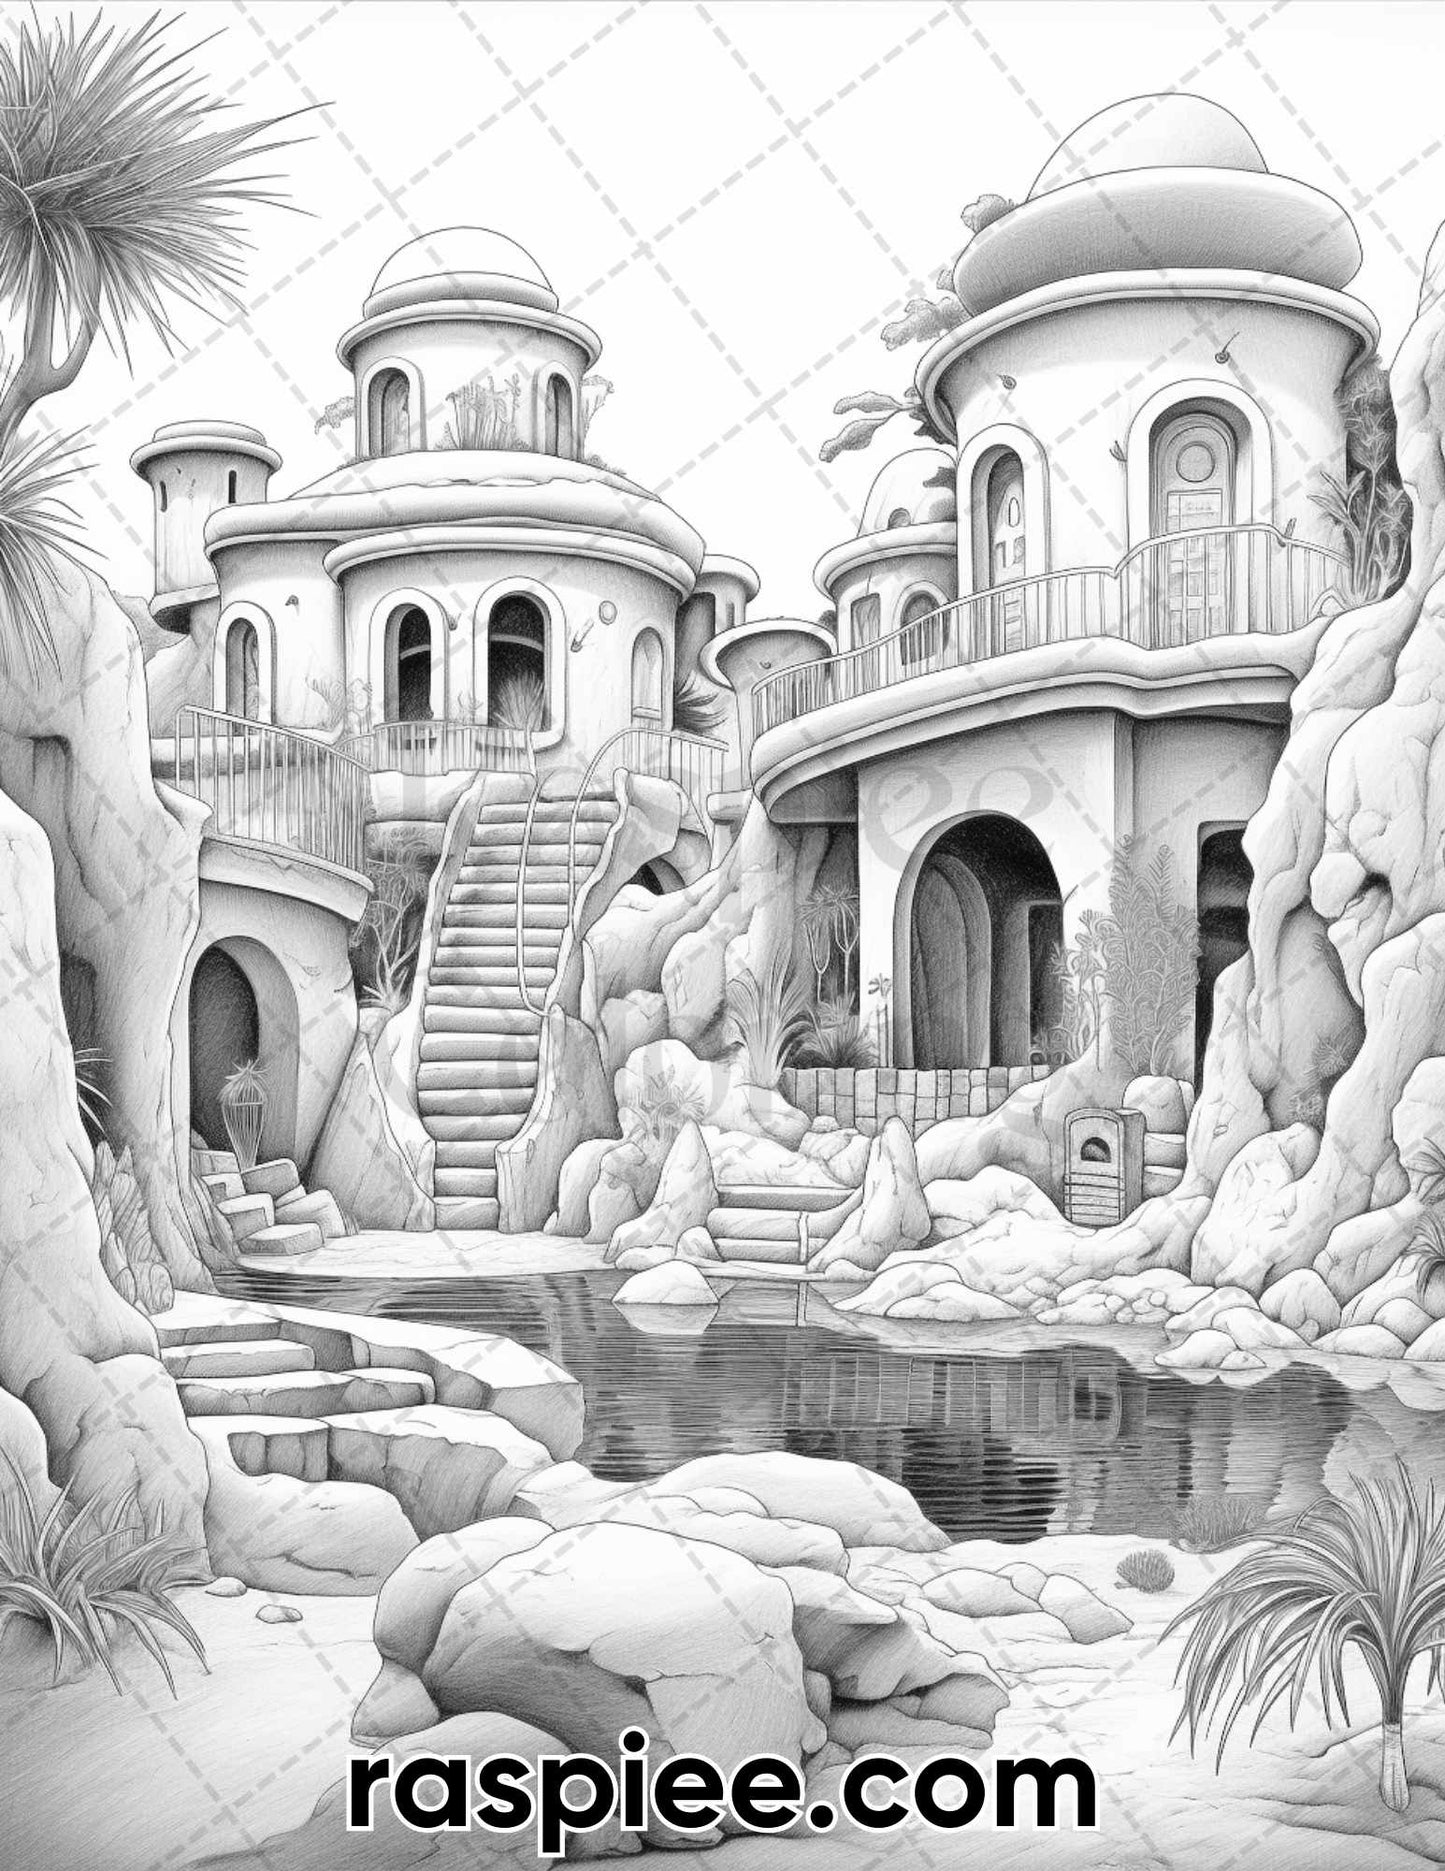 Desert Oasis Fairy Homes Coloring Pages, Grayscale Coloring Sheets, Adult Coloring Book Printable, Digital Downloadable Coloring, Detailed Fantasy Coloring, Stress Relief Coloring Pages, Desert Landscape Coloring Pages, Grown-Up Coloring Printable